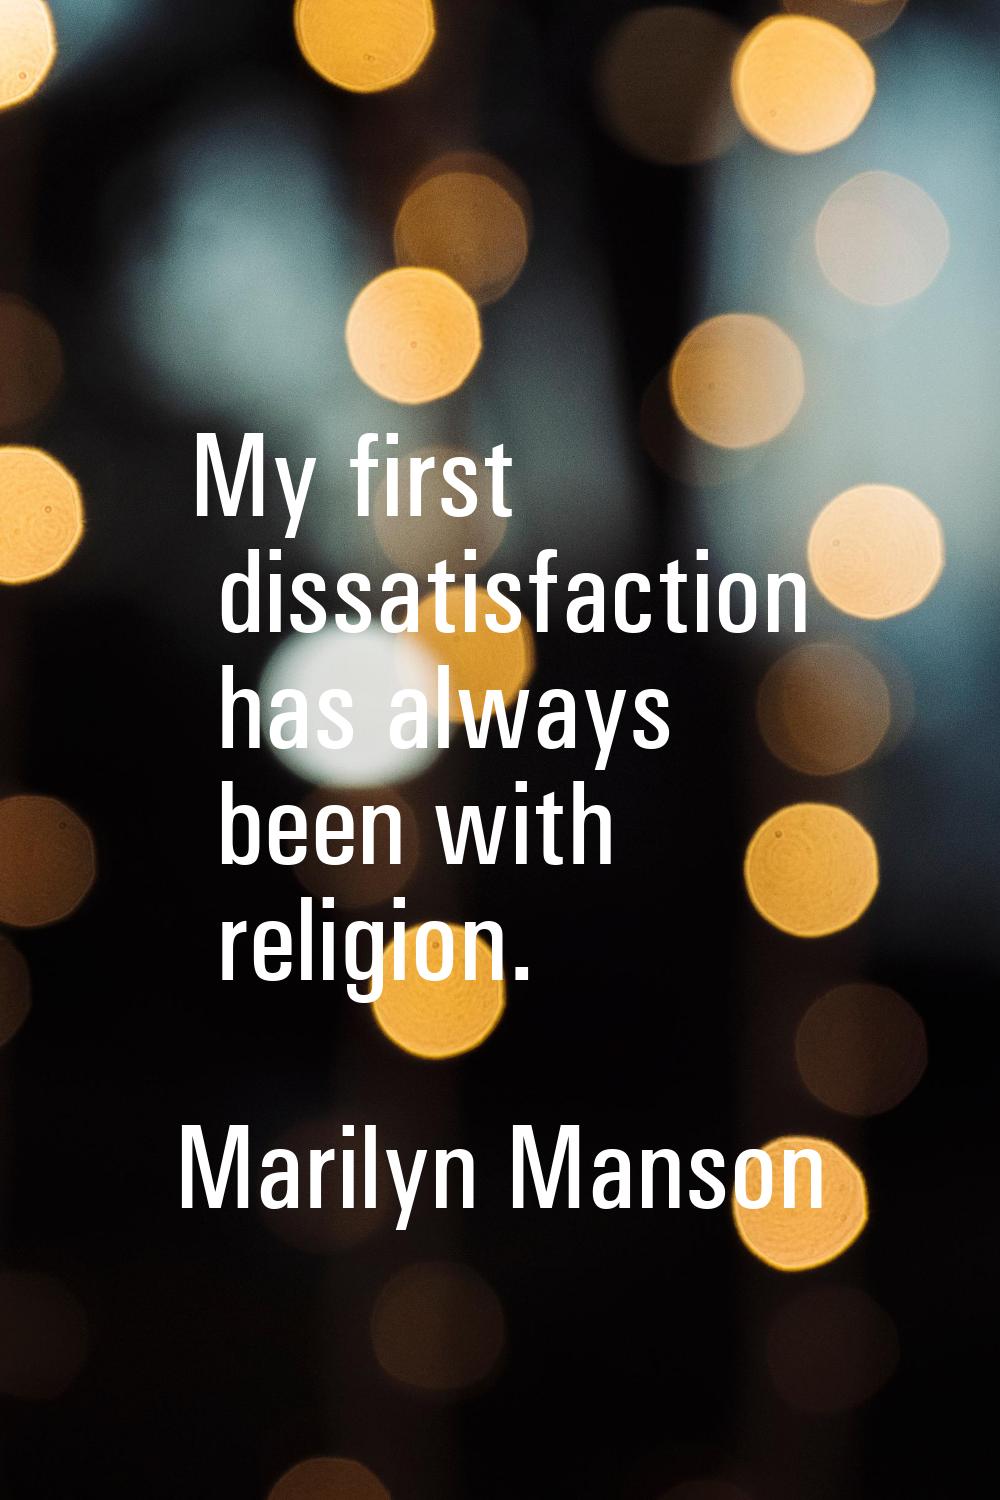 My first dissatisfaction has always been with religion.